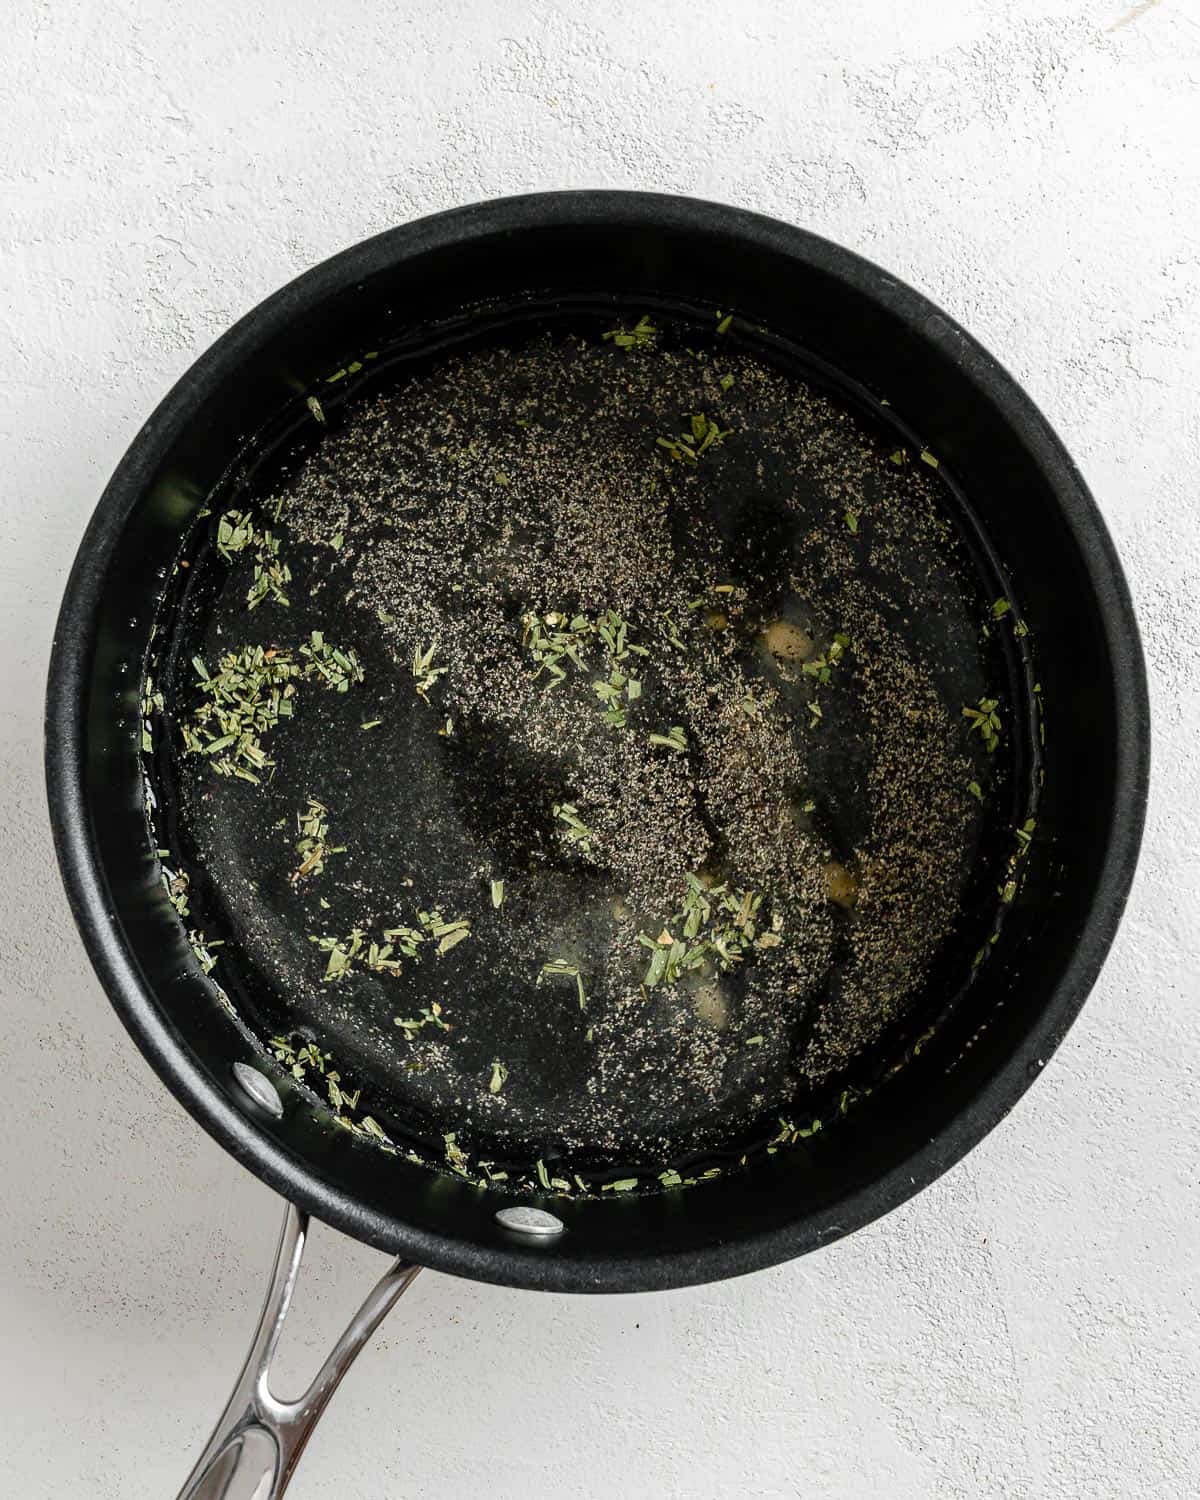 process shot of mixing spices in a black pan against a white background